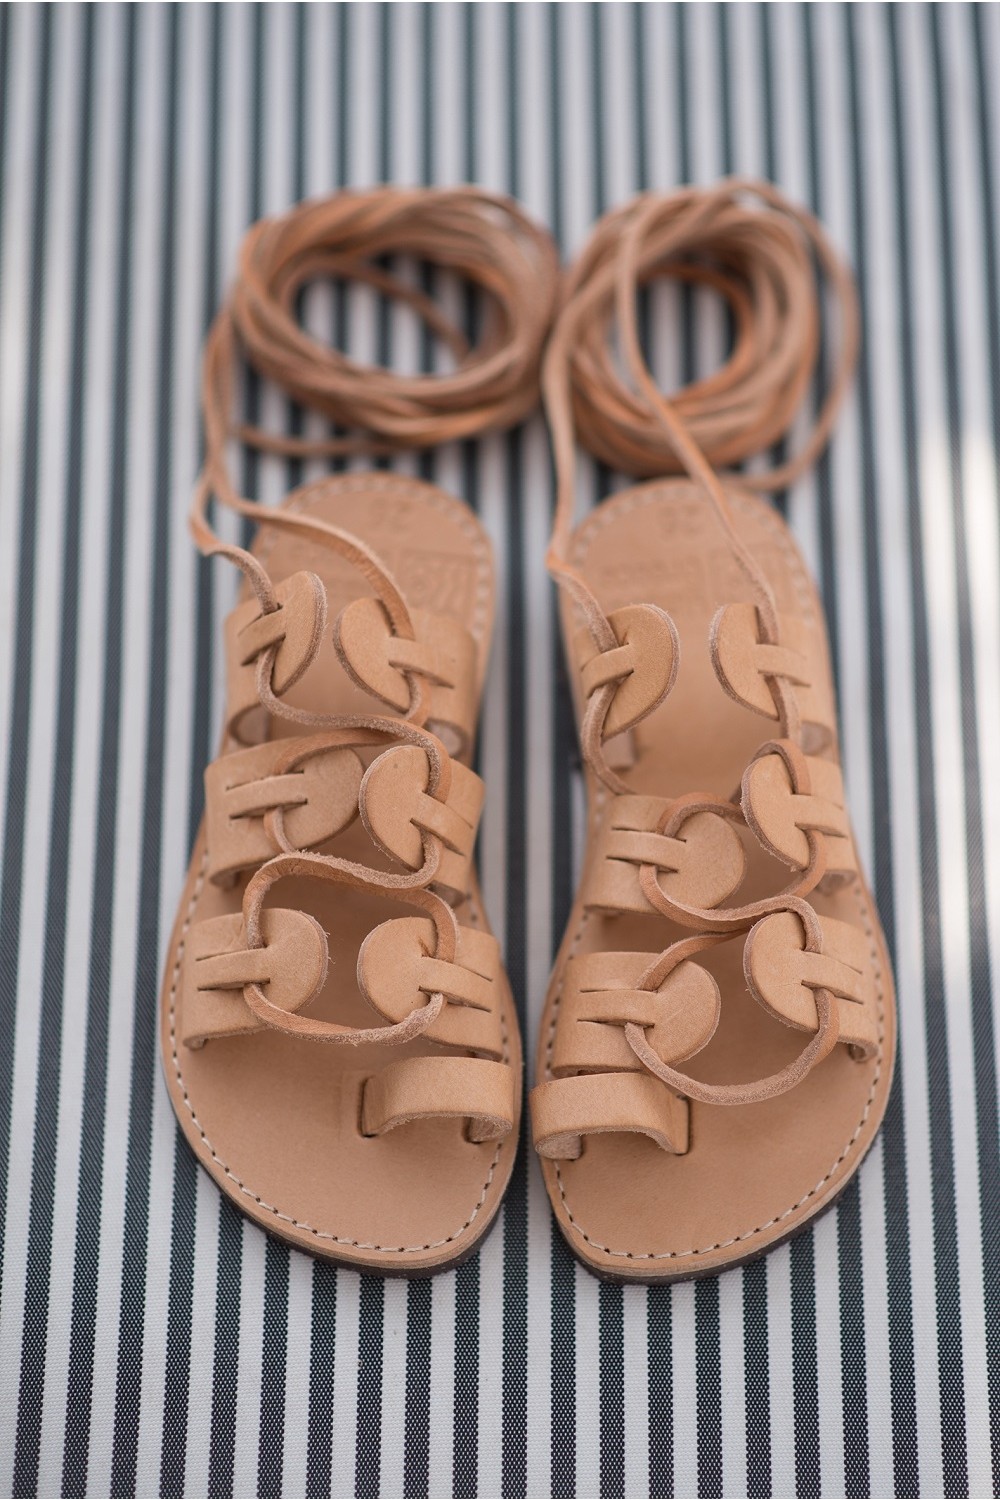 KID'S  LEATHER SANDALS "LACE UP"